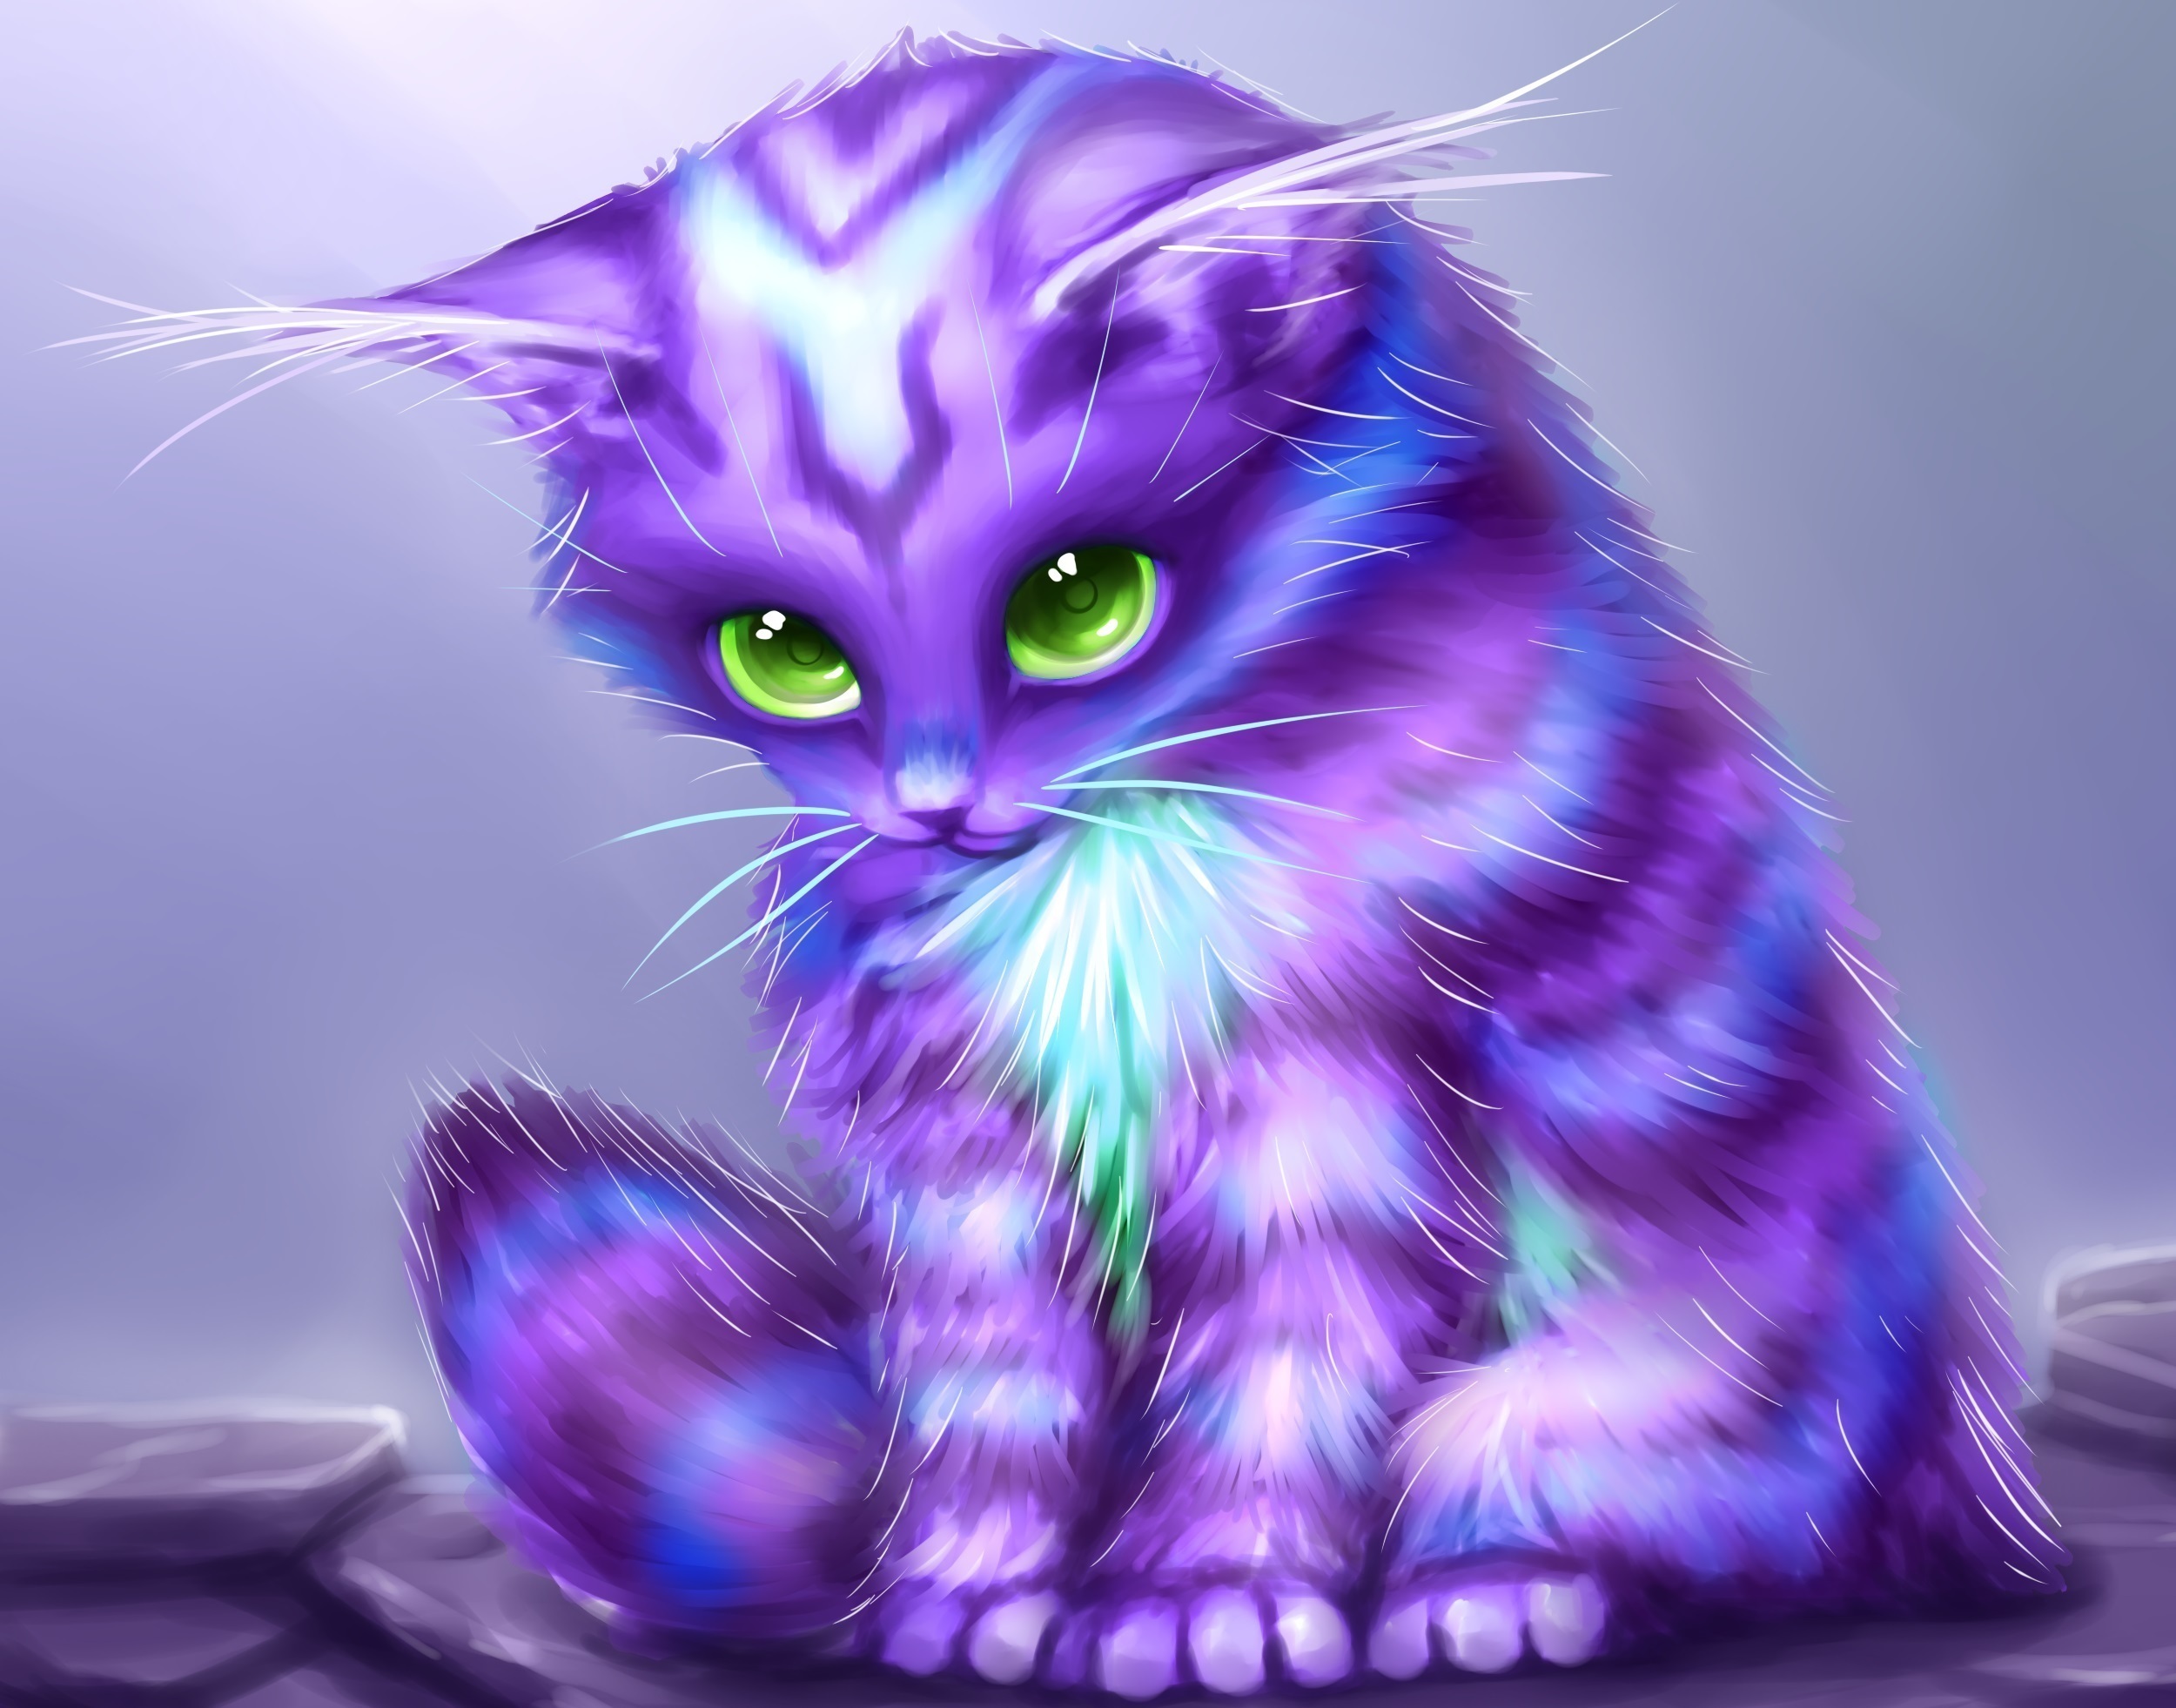 Cute purple cat with green eyes